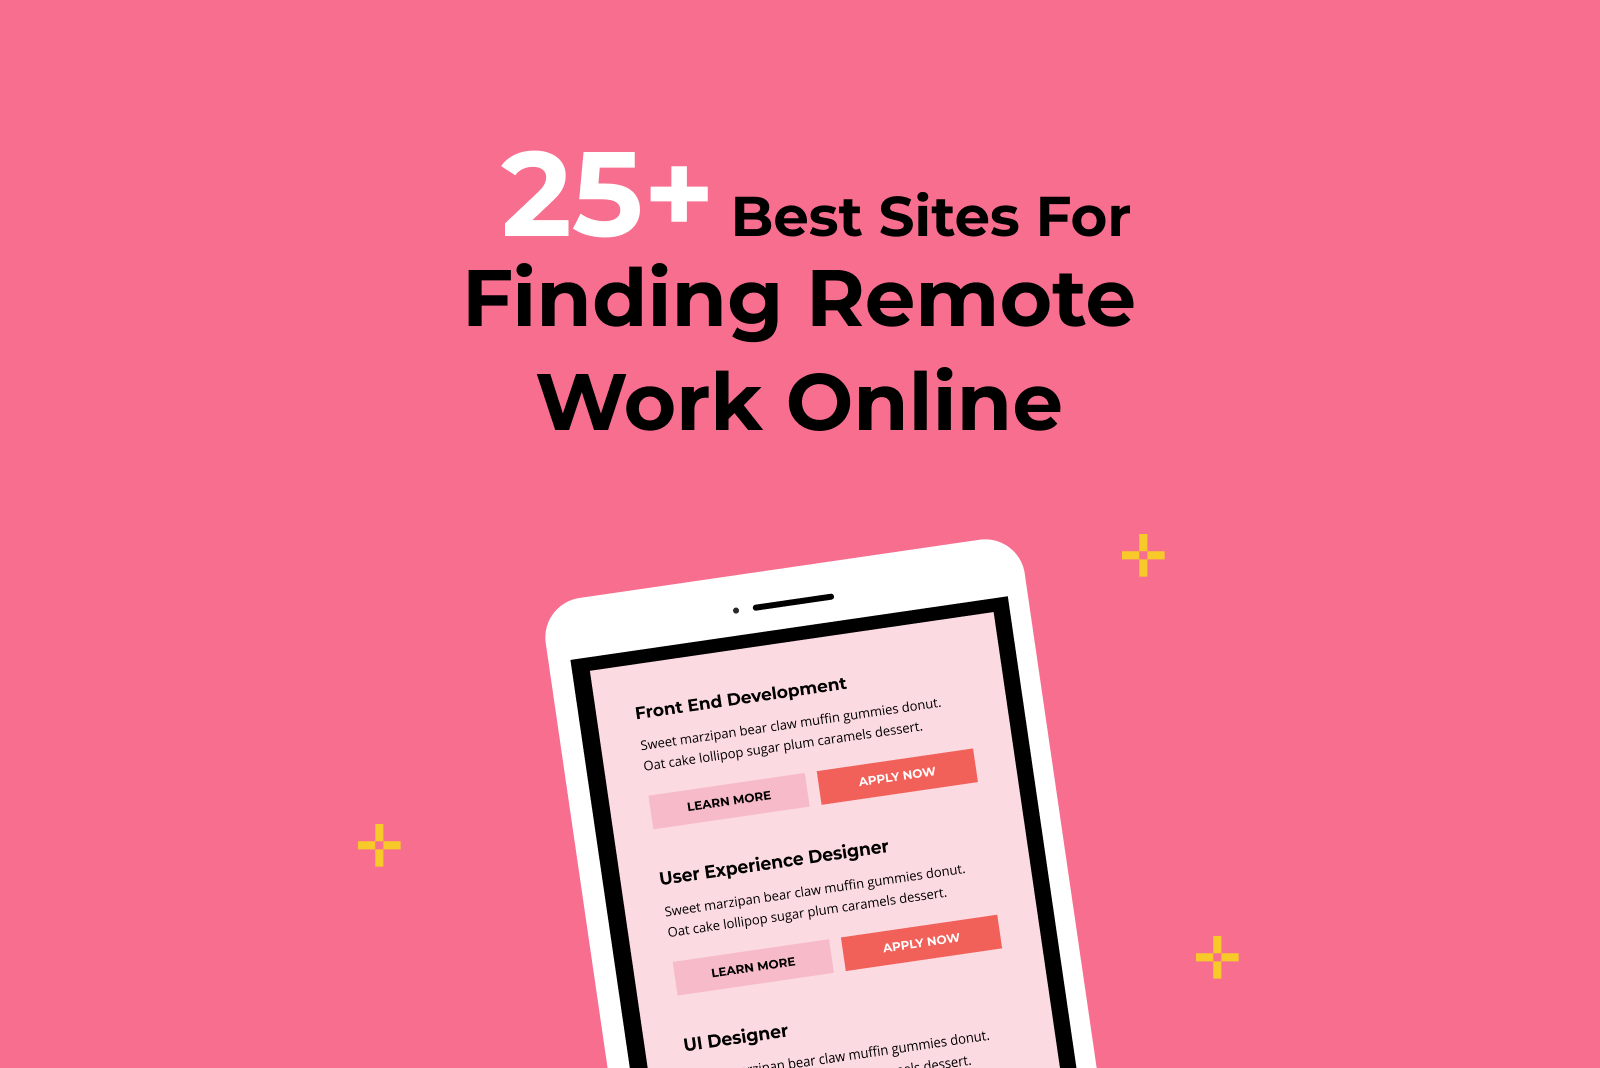 25 Best Sites for Finding Remote Work Online